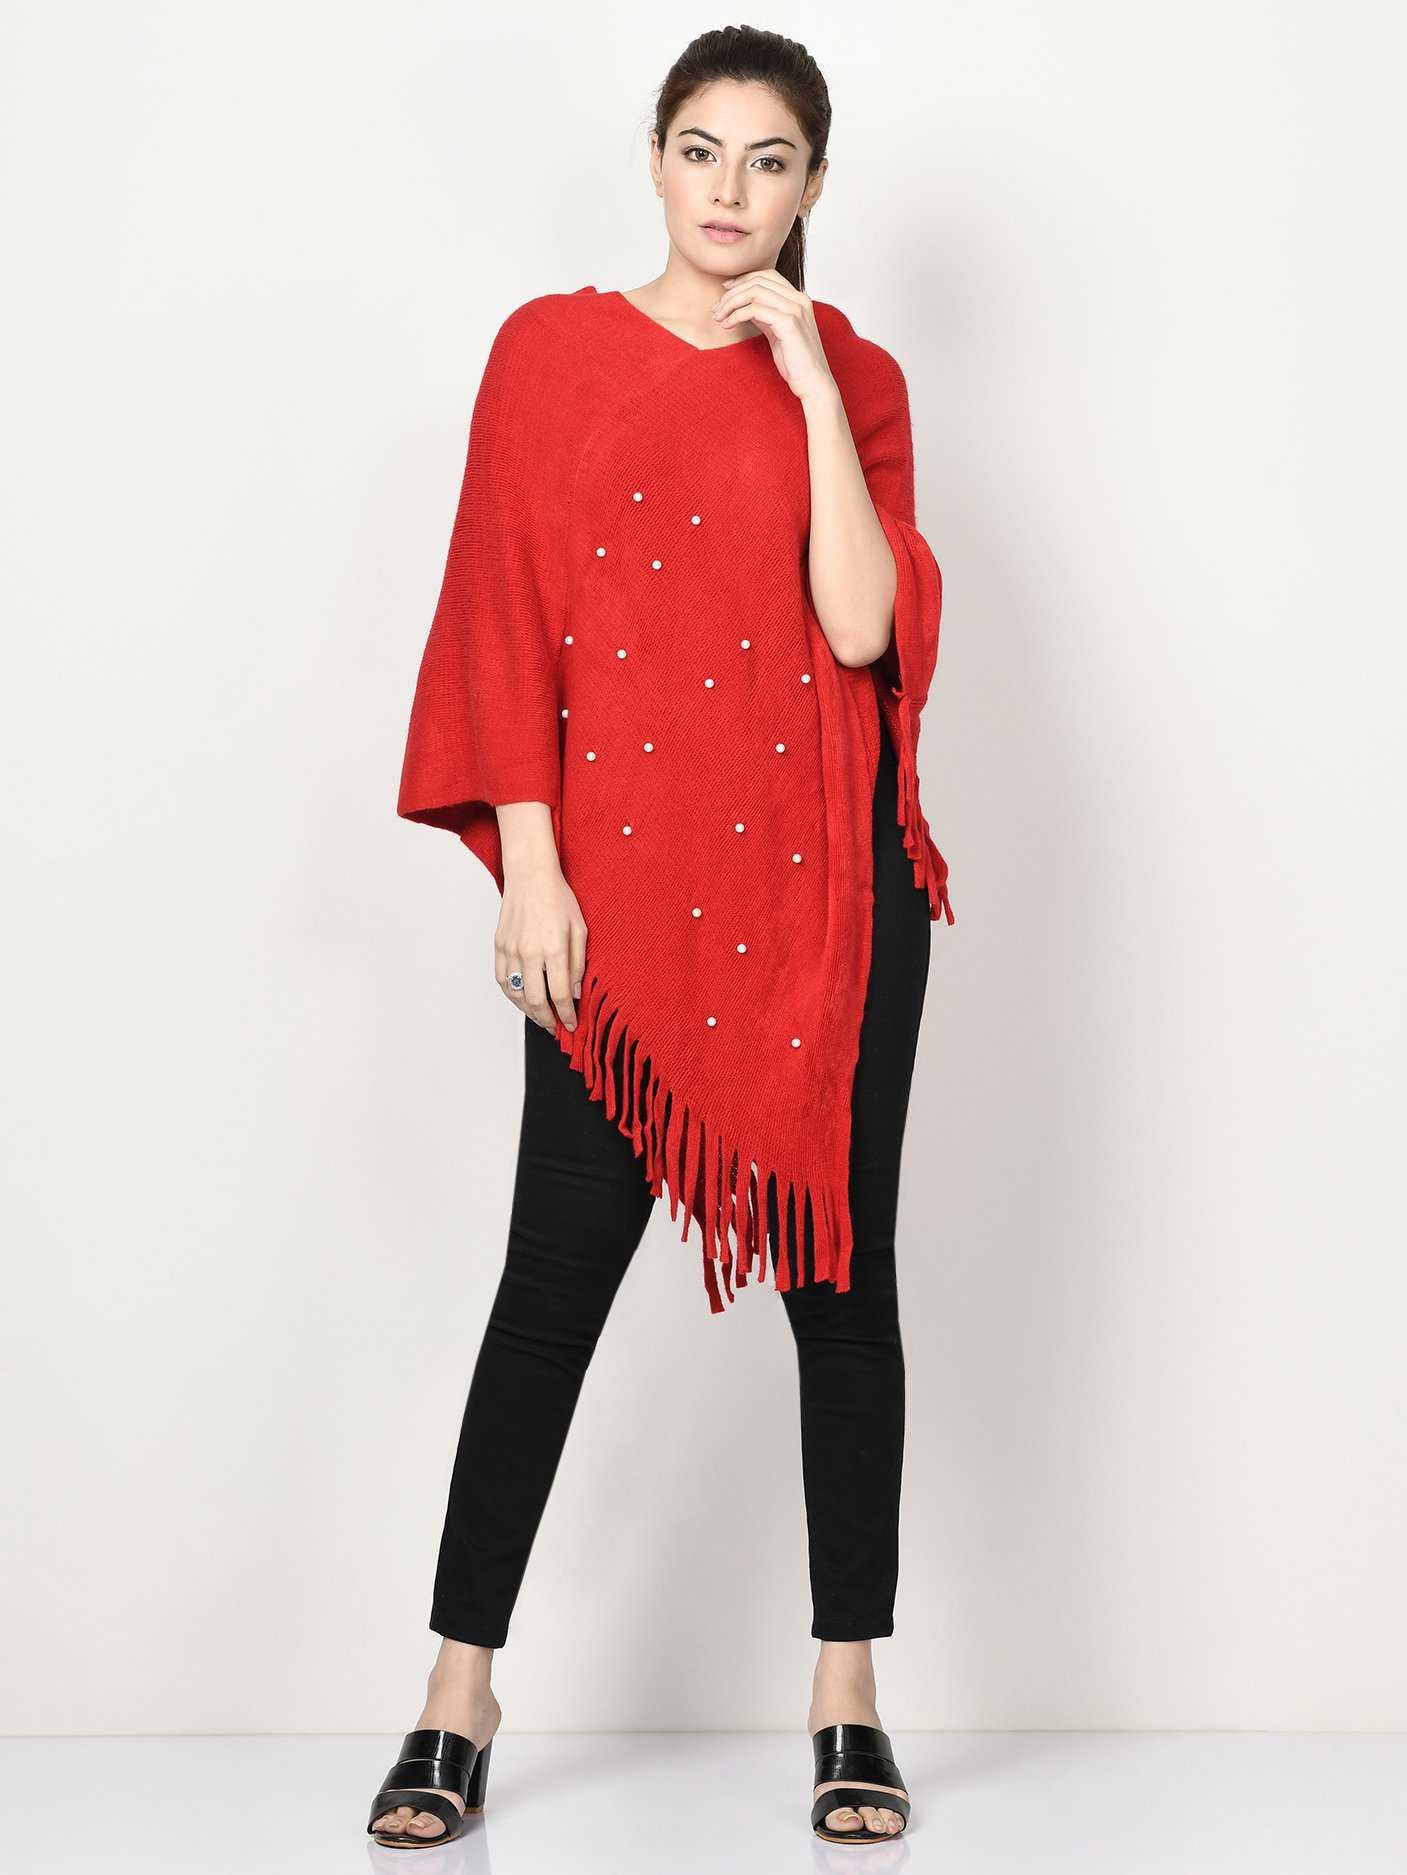 Limelight Pearl Poncho CPS69-FRE-RED 2019 | Limelight Sale 2020